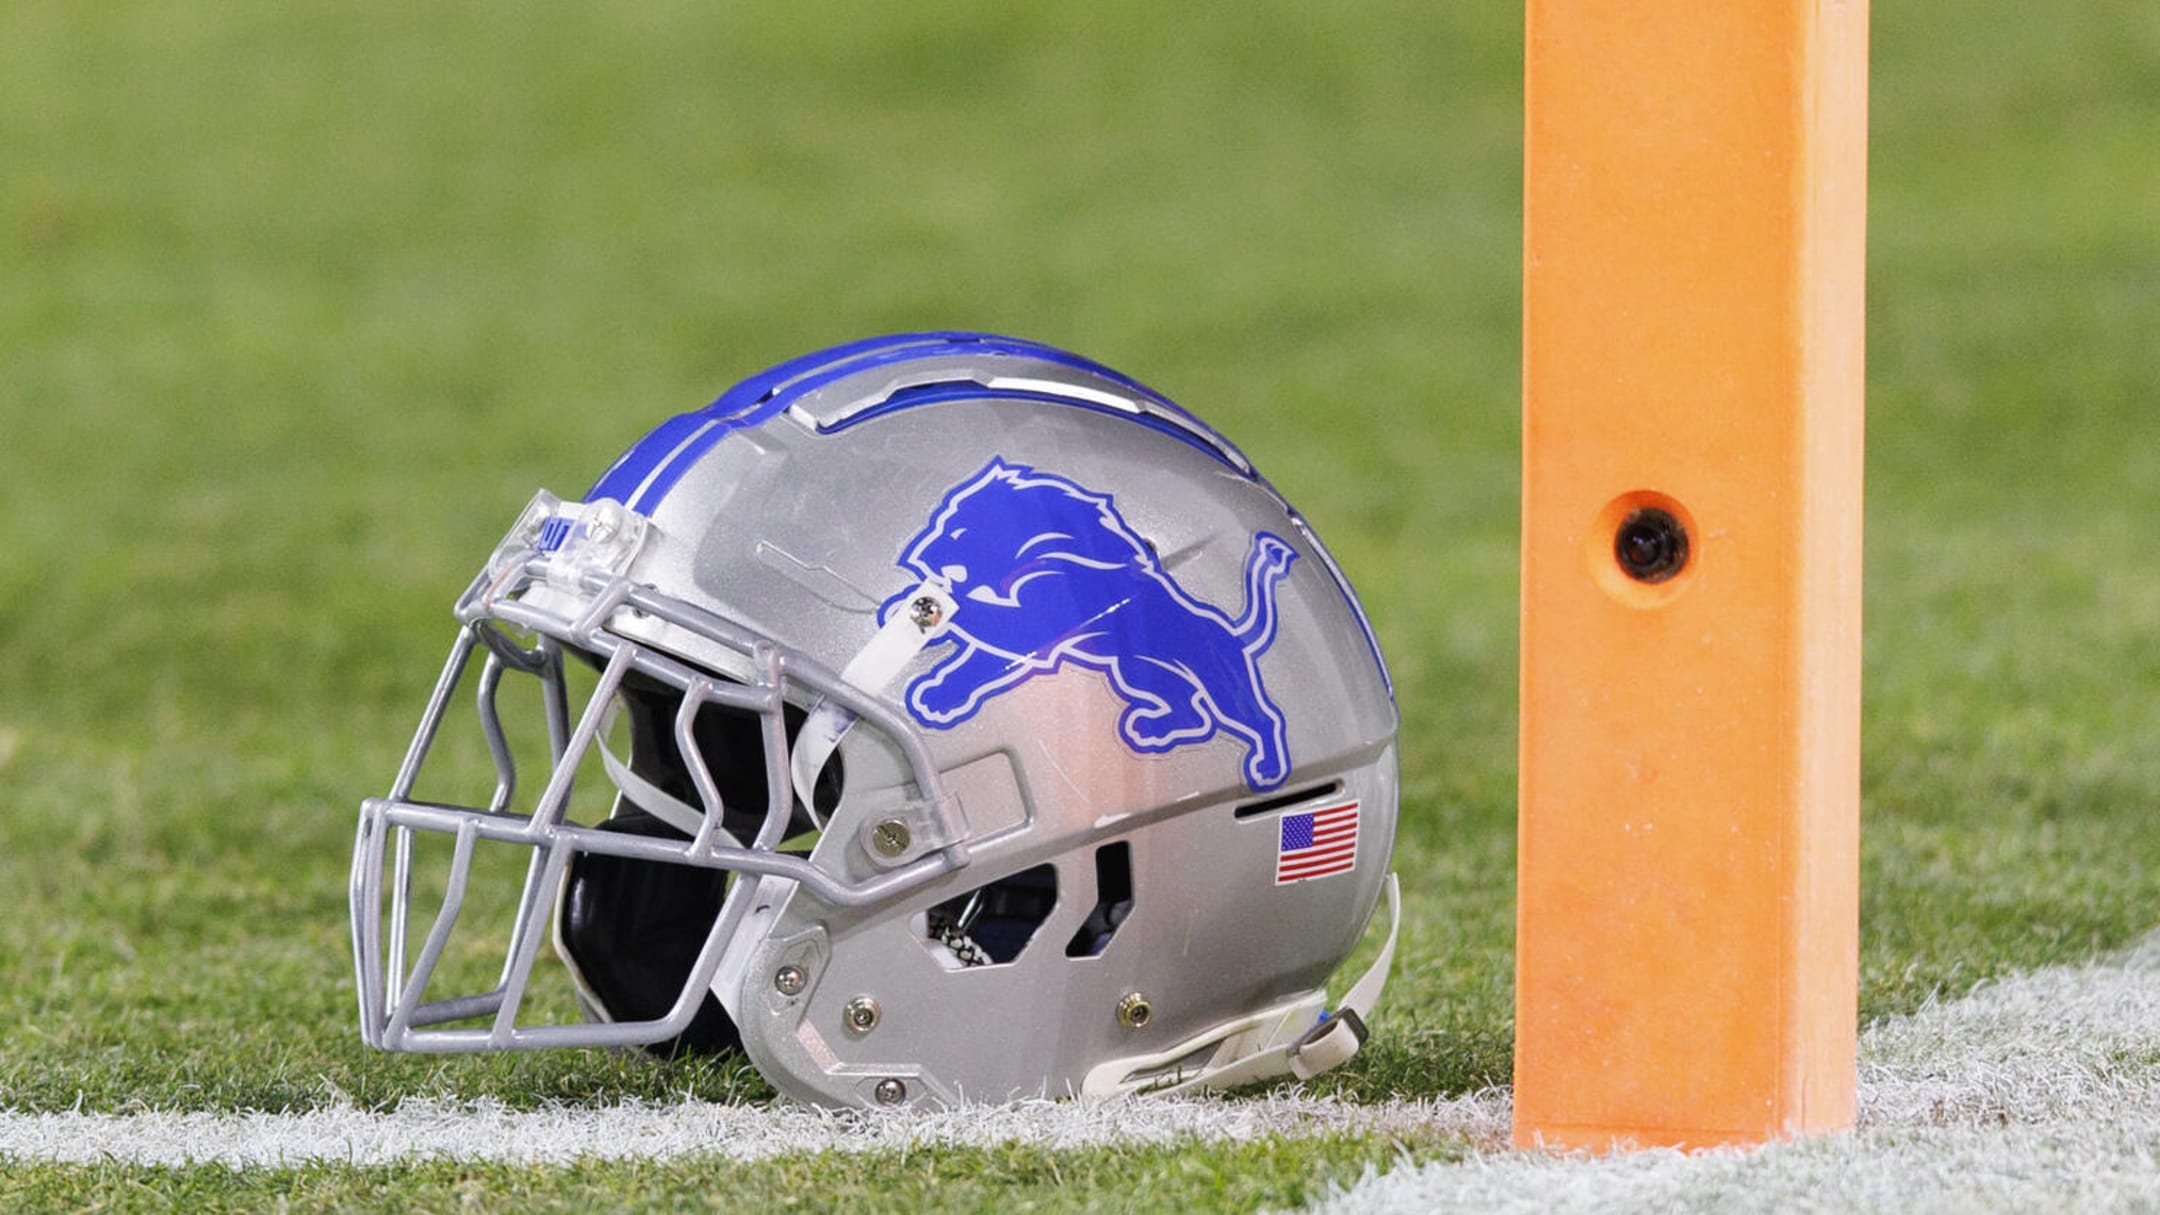 Ford Field has waiting list for Lions season tickets for first